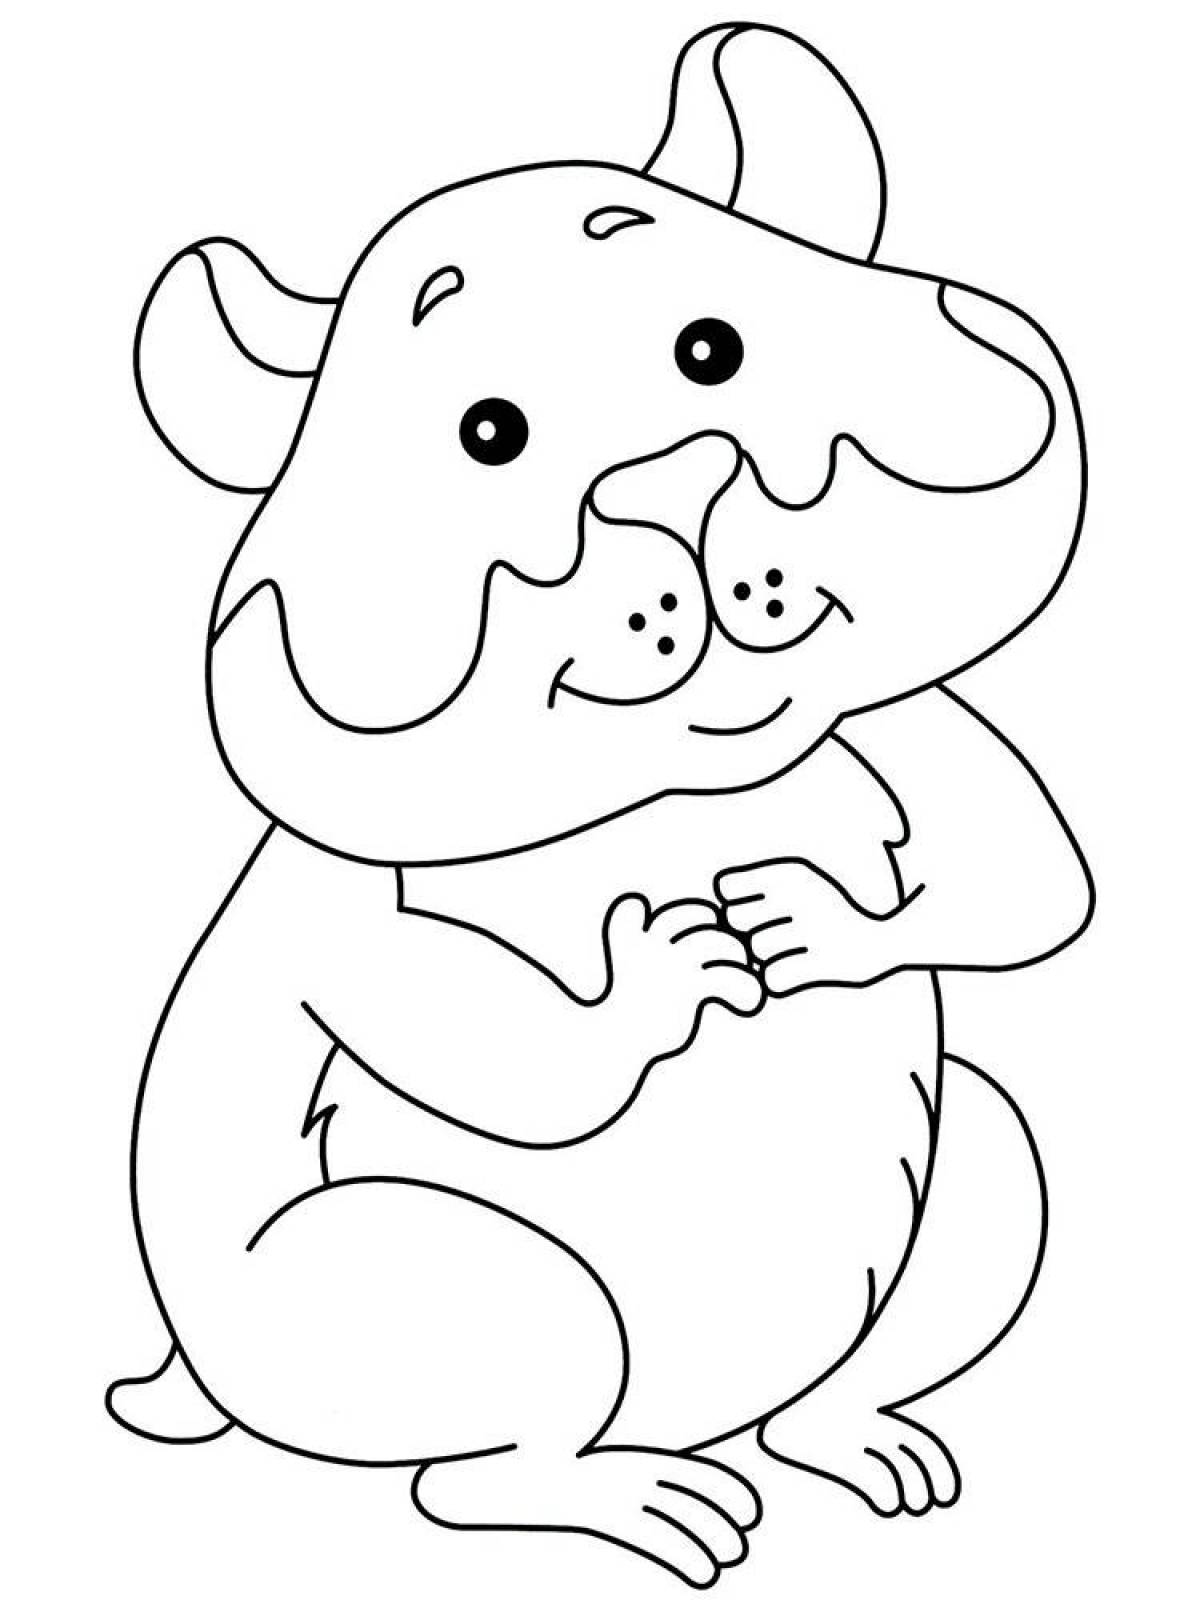 Outstanding hamster coloring page for kids